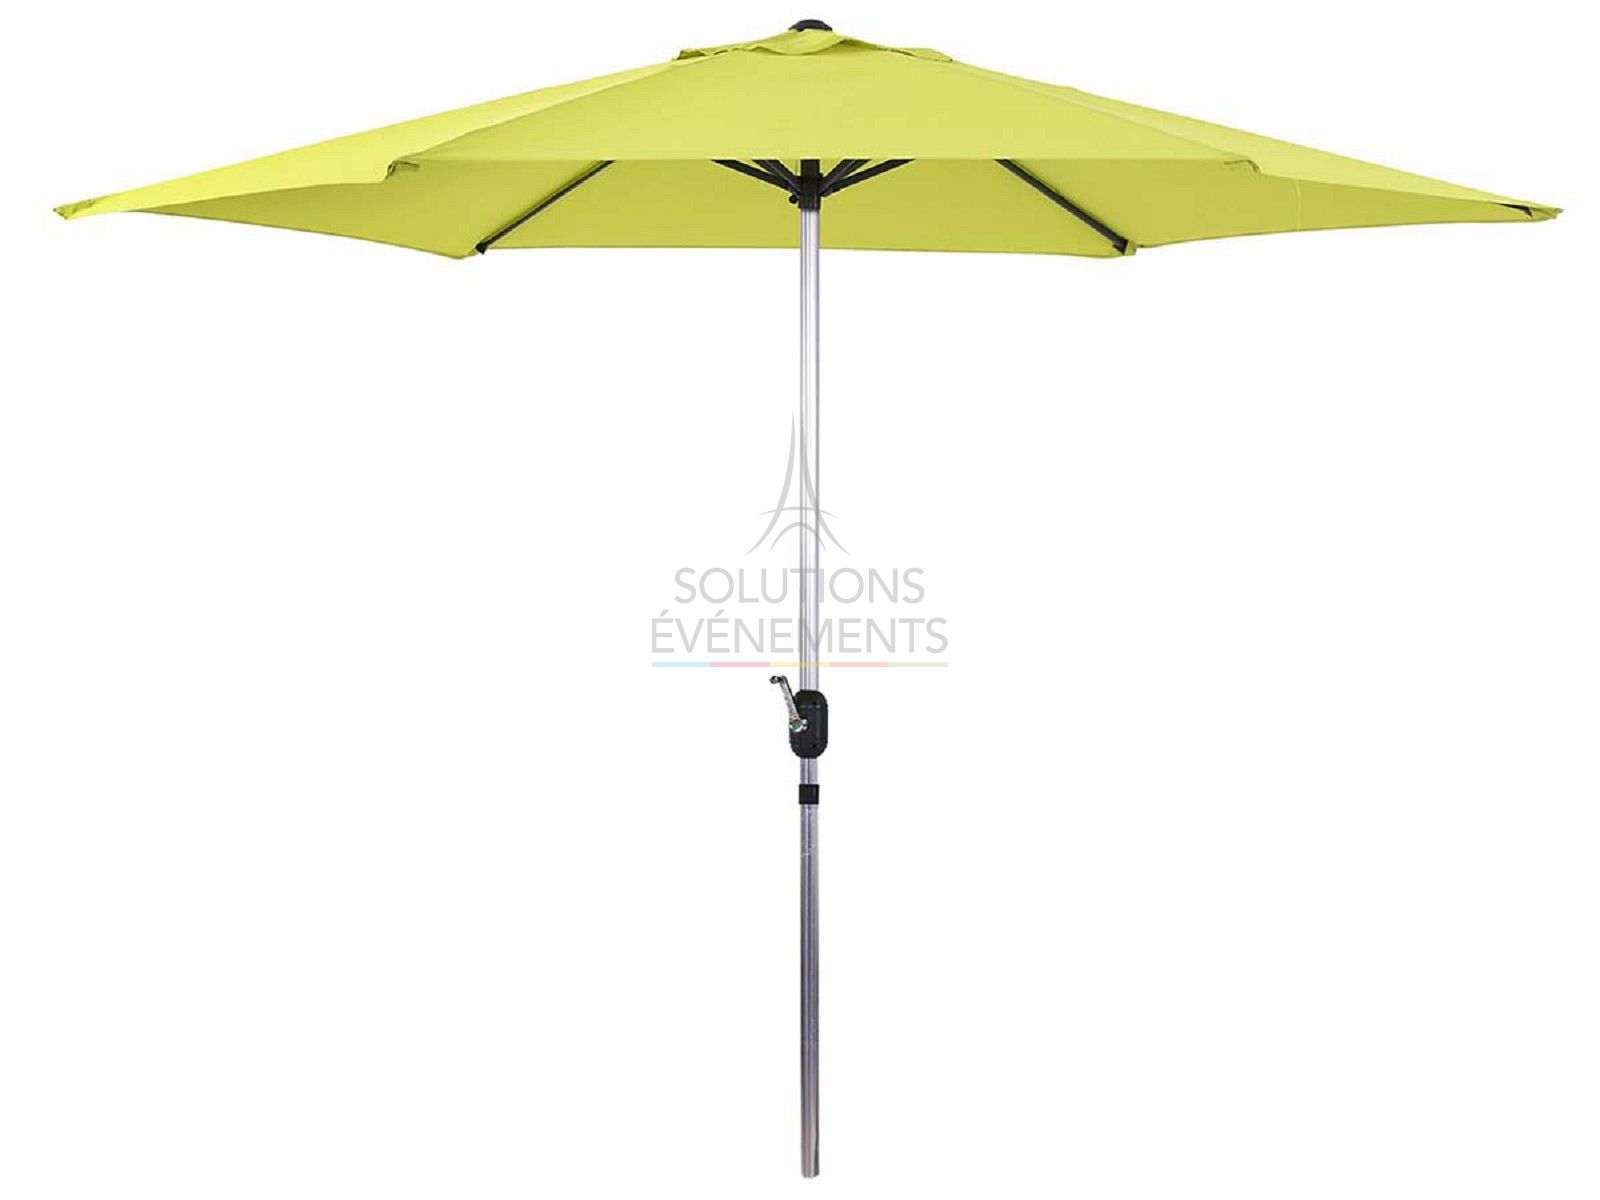 Rental of fabric parasols for gardens and terraces